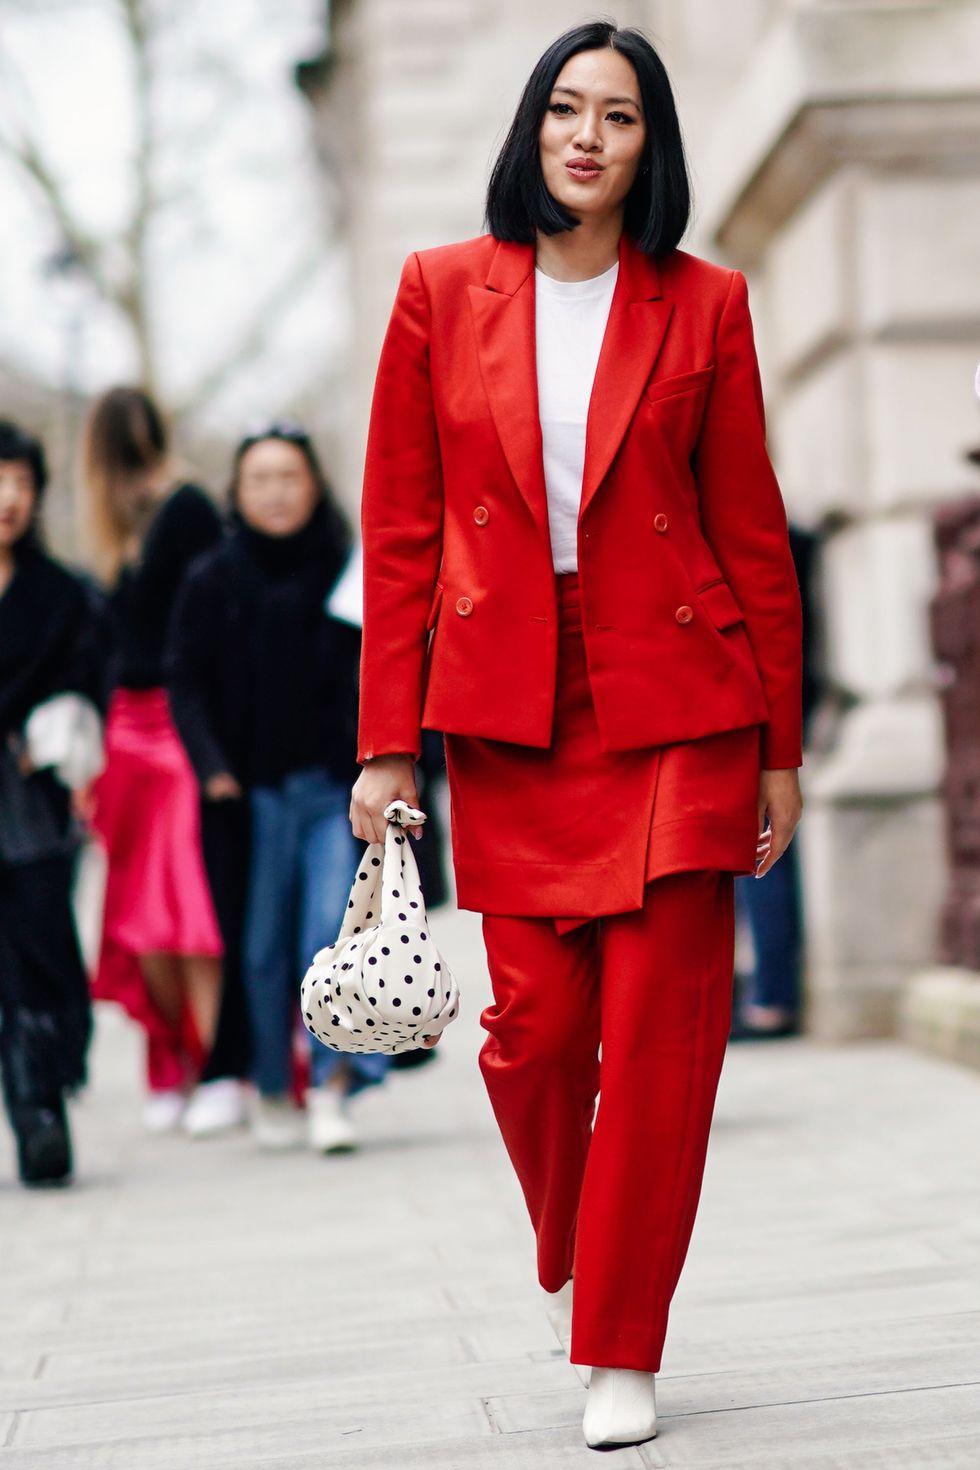 Remission Fantasi Fantasifulde Trend watch: red trouser suits